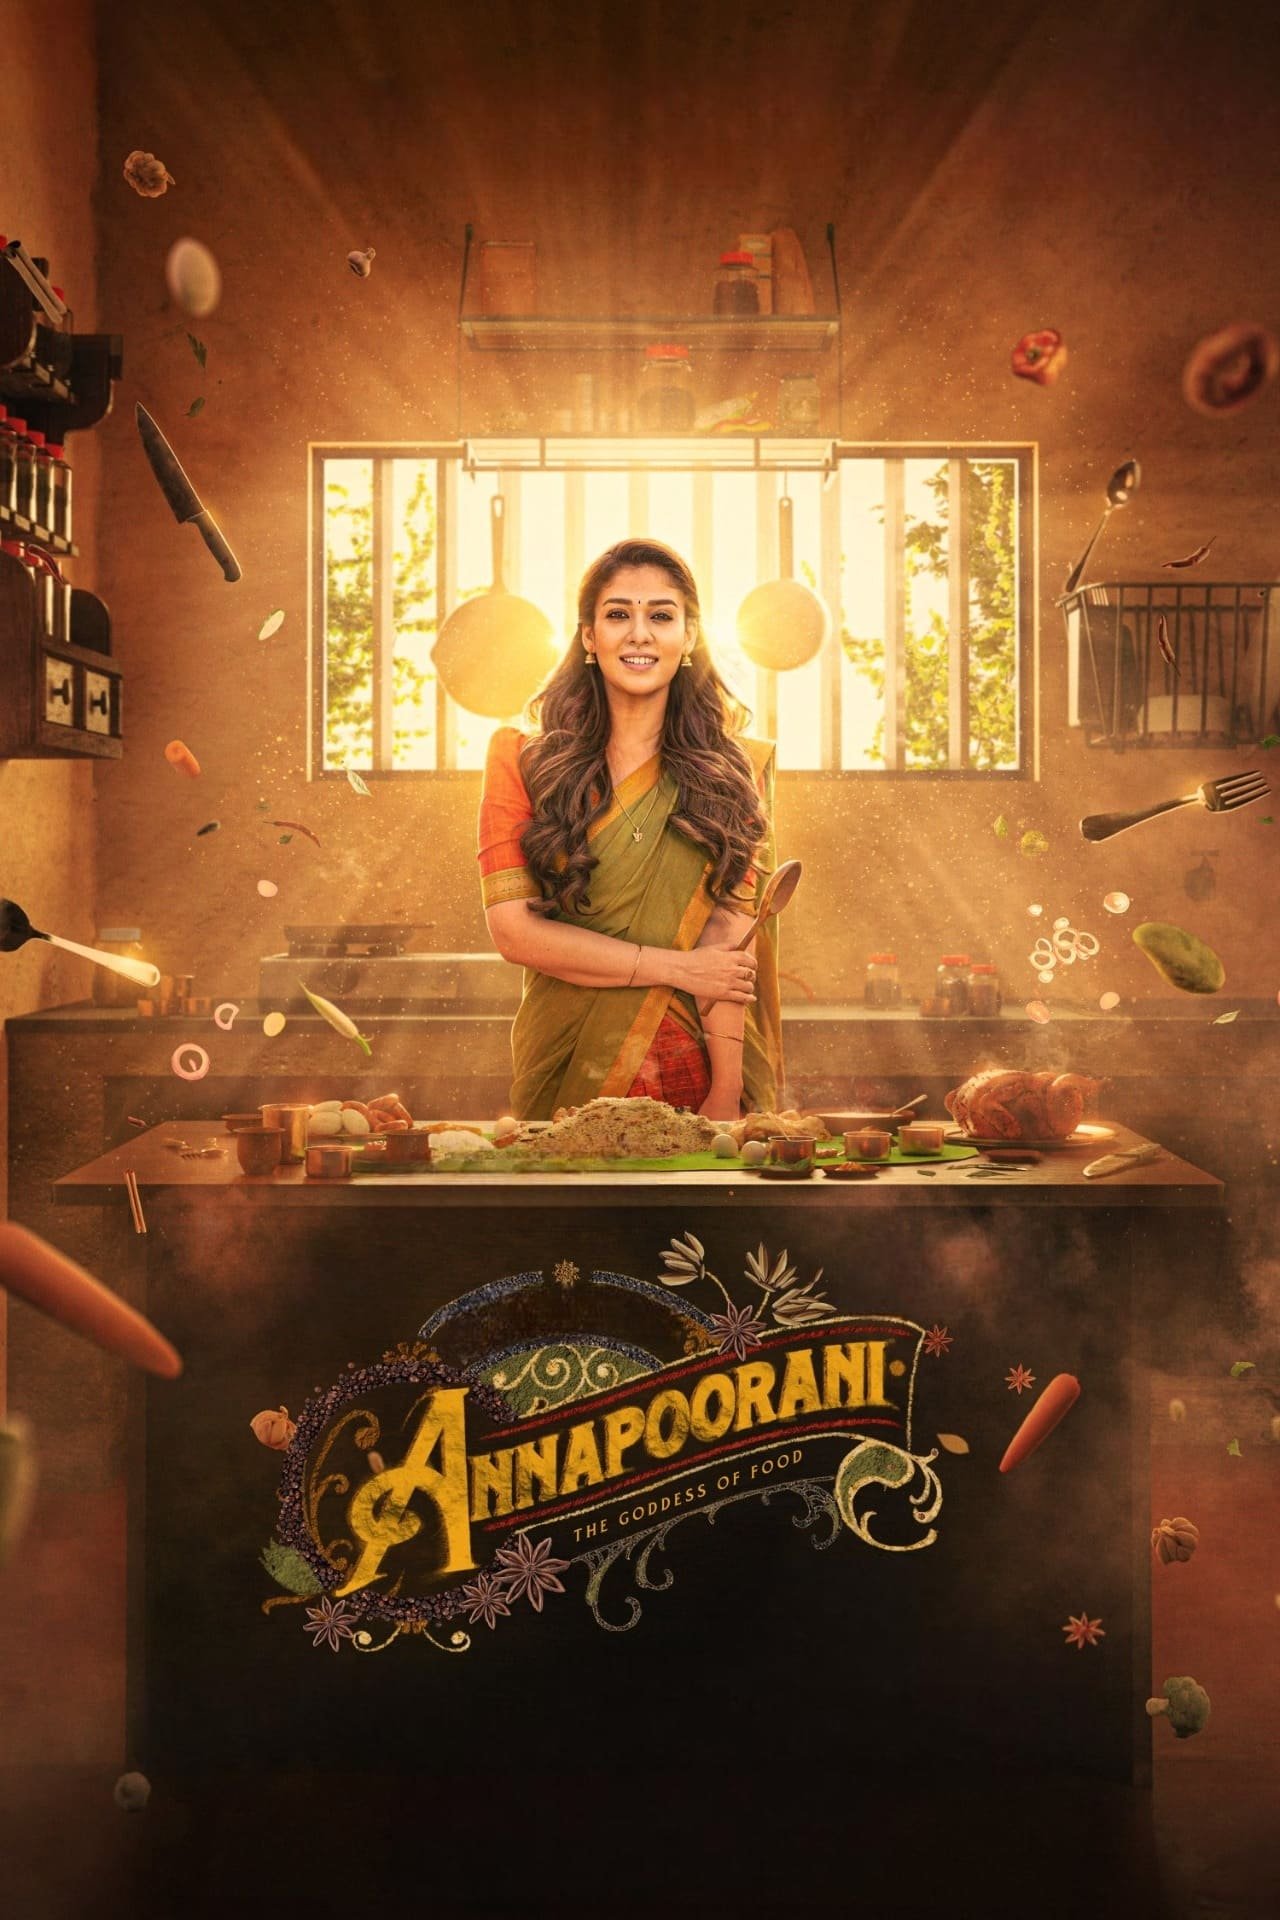 Poster for the movie "Annapoorani"